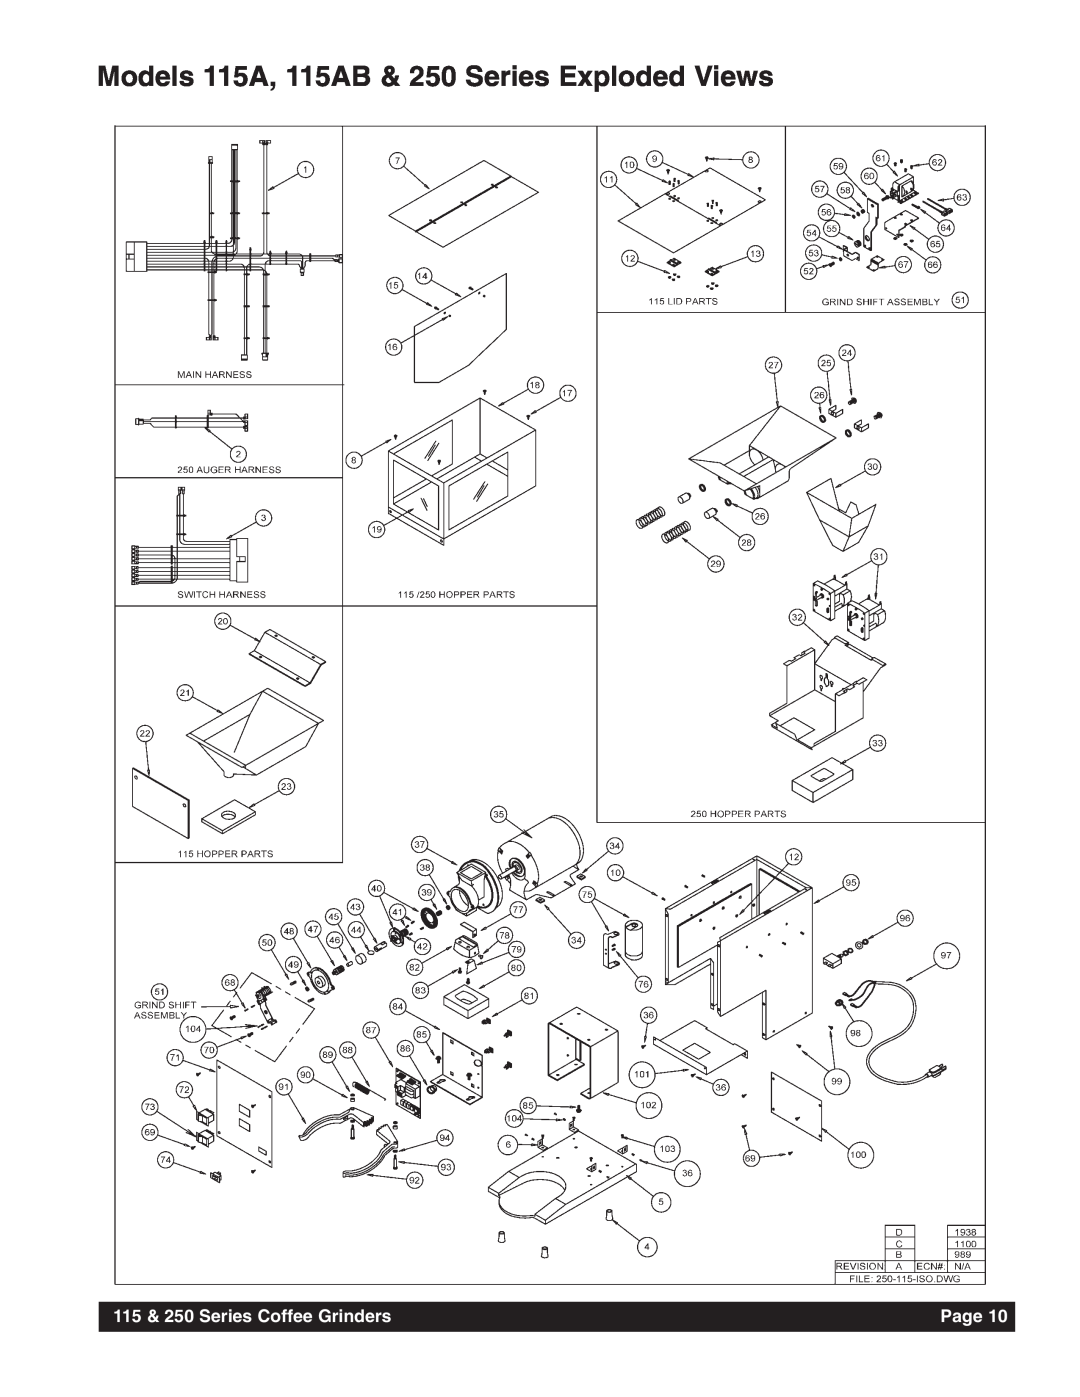 Grindmaster instruction manual Models 115A, 115AB & 250 Series Exploded Views, 115 & 250 Series Coffee Grinders, Page 